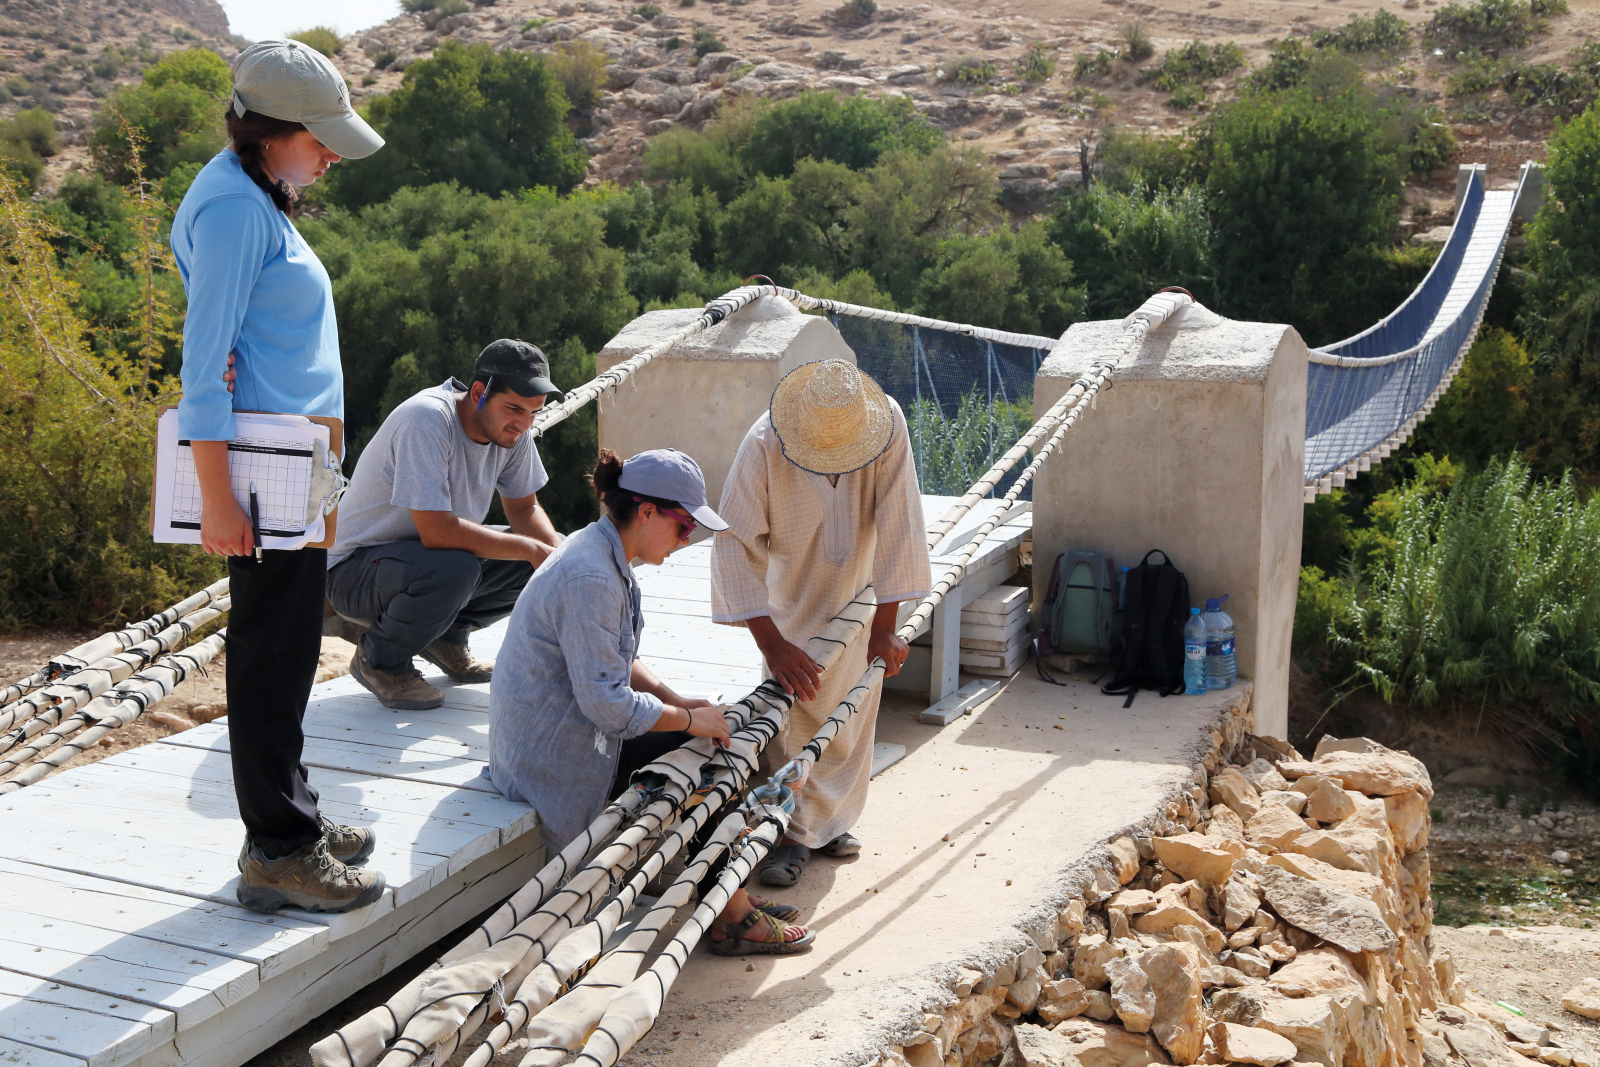 Three students work on a suspension bridge in a desert landscape with a local helper.